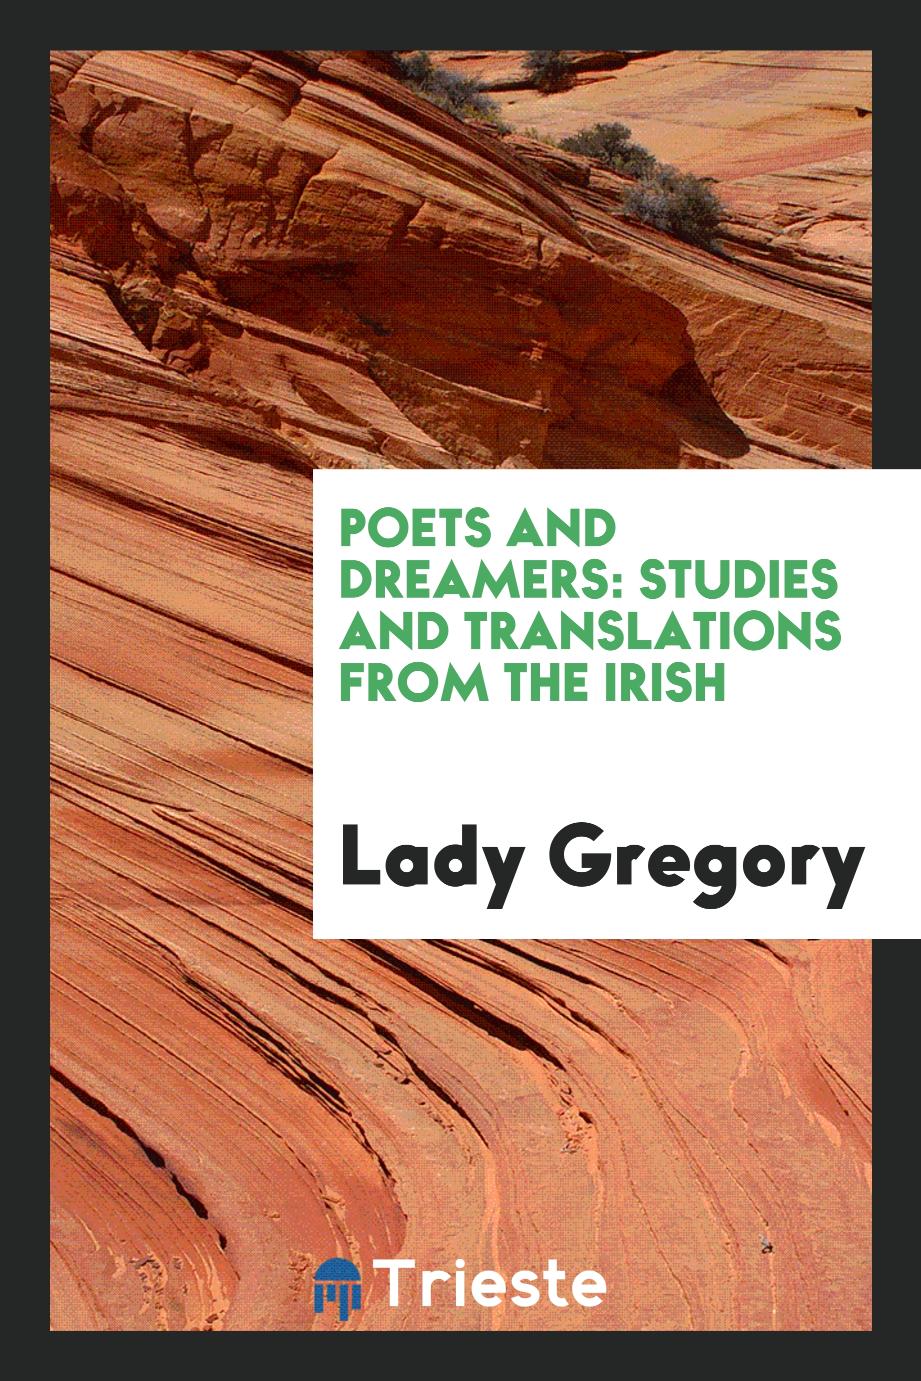 Poets and dreamers: studies and translations from the Irish